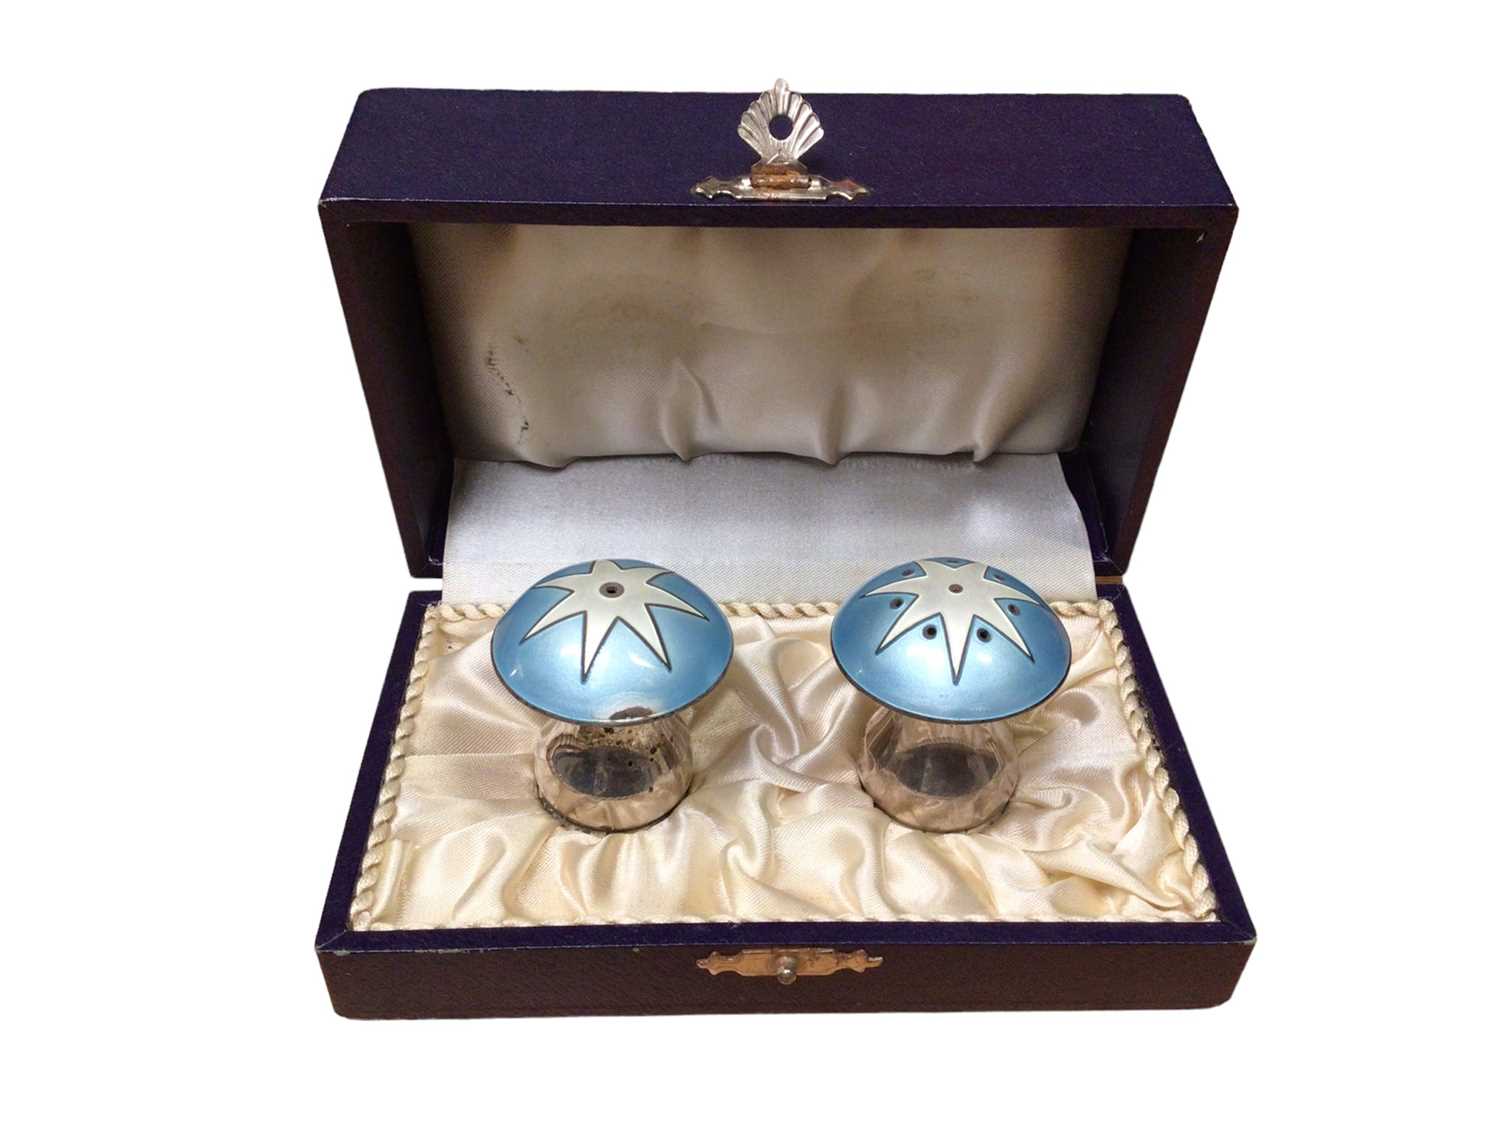 Lot 158 - Pair of Danish silver and enamel novelty salt and pepper casters in the form of toadstools